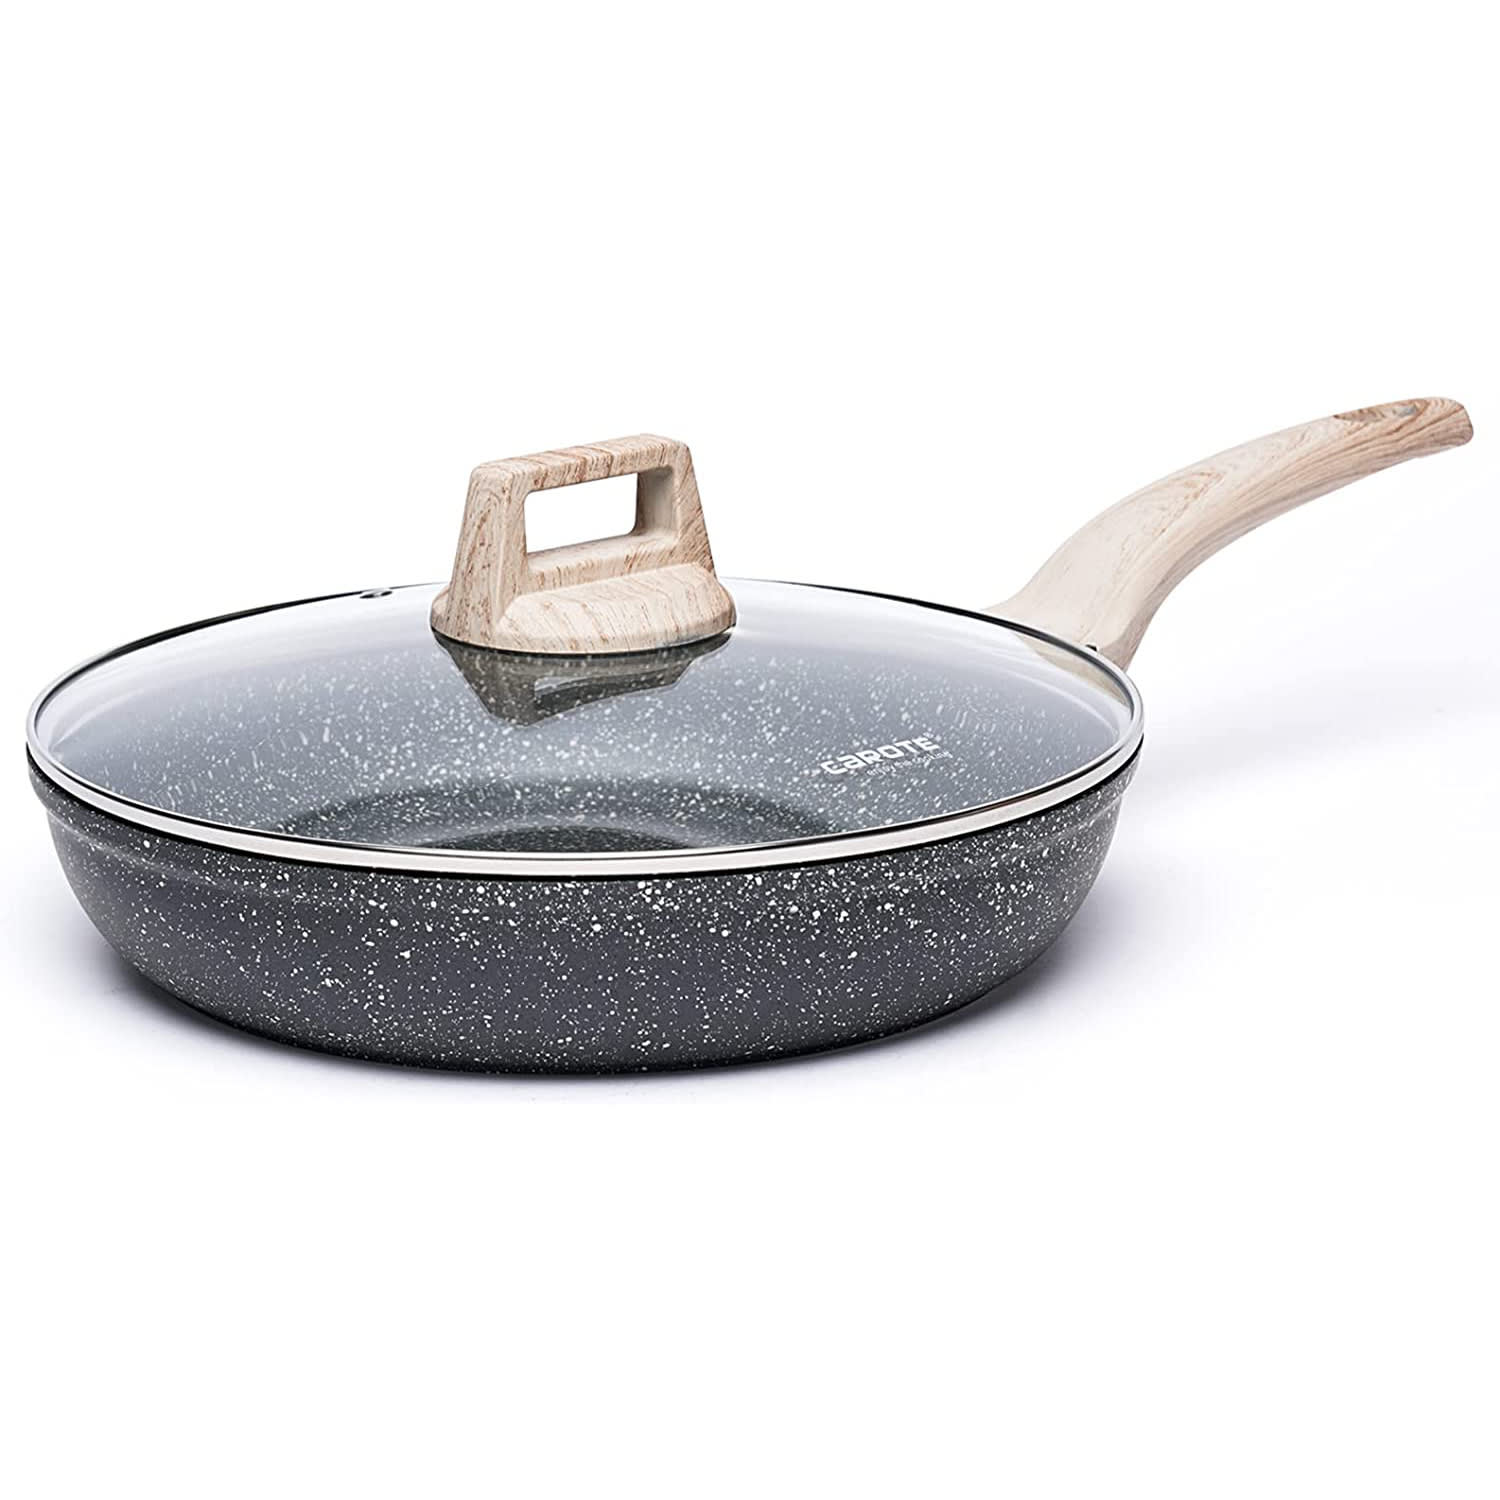 http://cdn.apartmenttherapy.info/image/upload/v1677618858/commerce/CAROTE-10-Inch-Nonstick-Frying-Pan-Lid-amazon.jpg